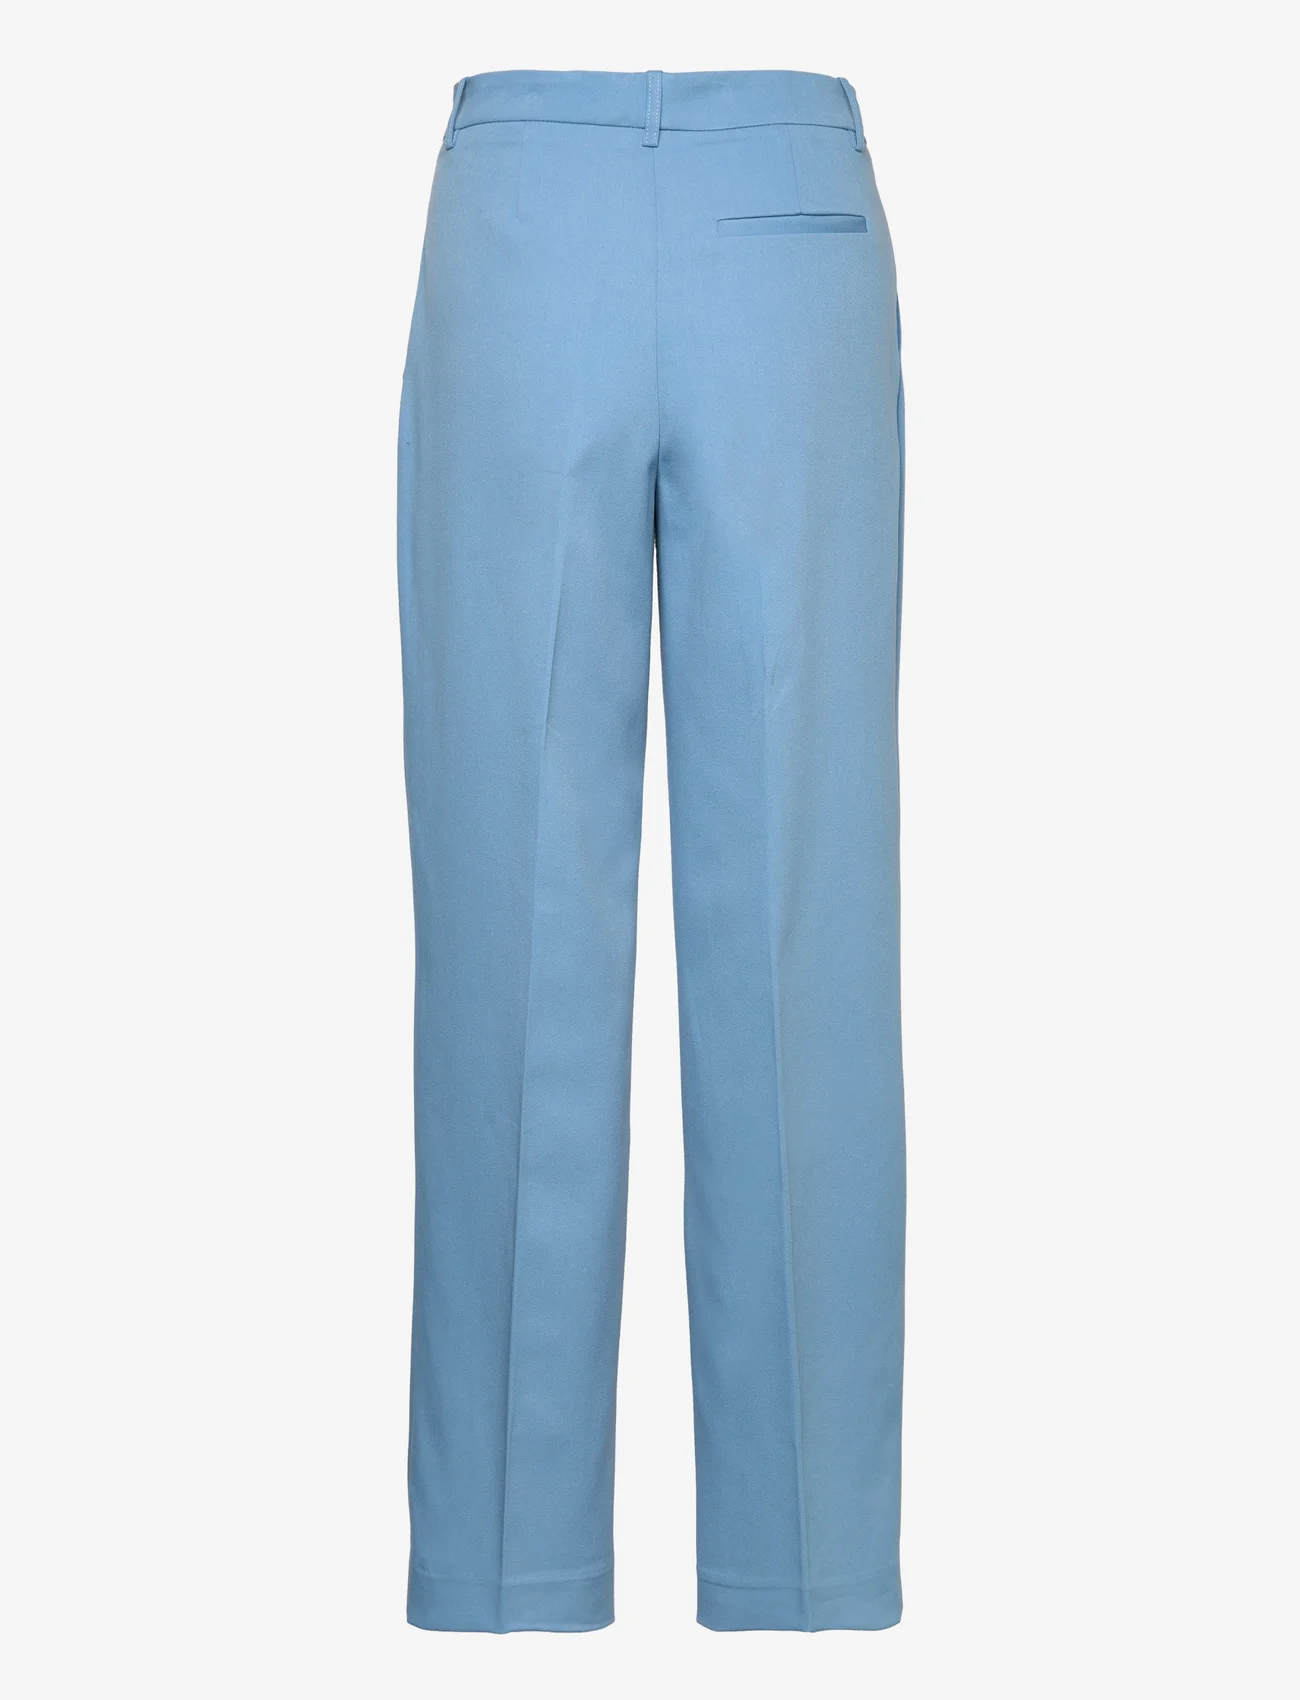 Coster Copenhagen - Pants with wide legs - Petra fit - tailored trousers - cool blue - 1